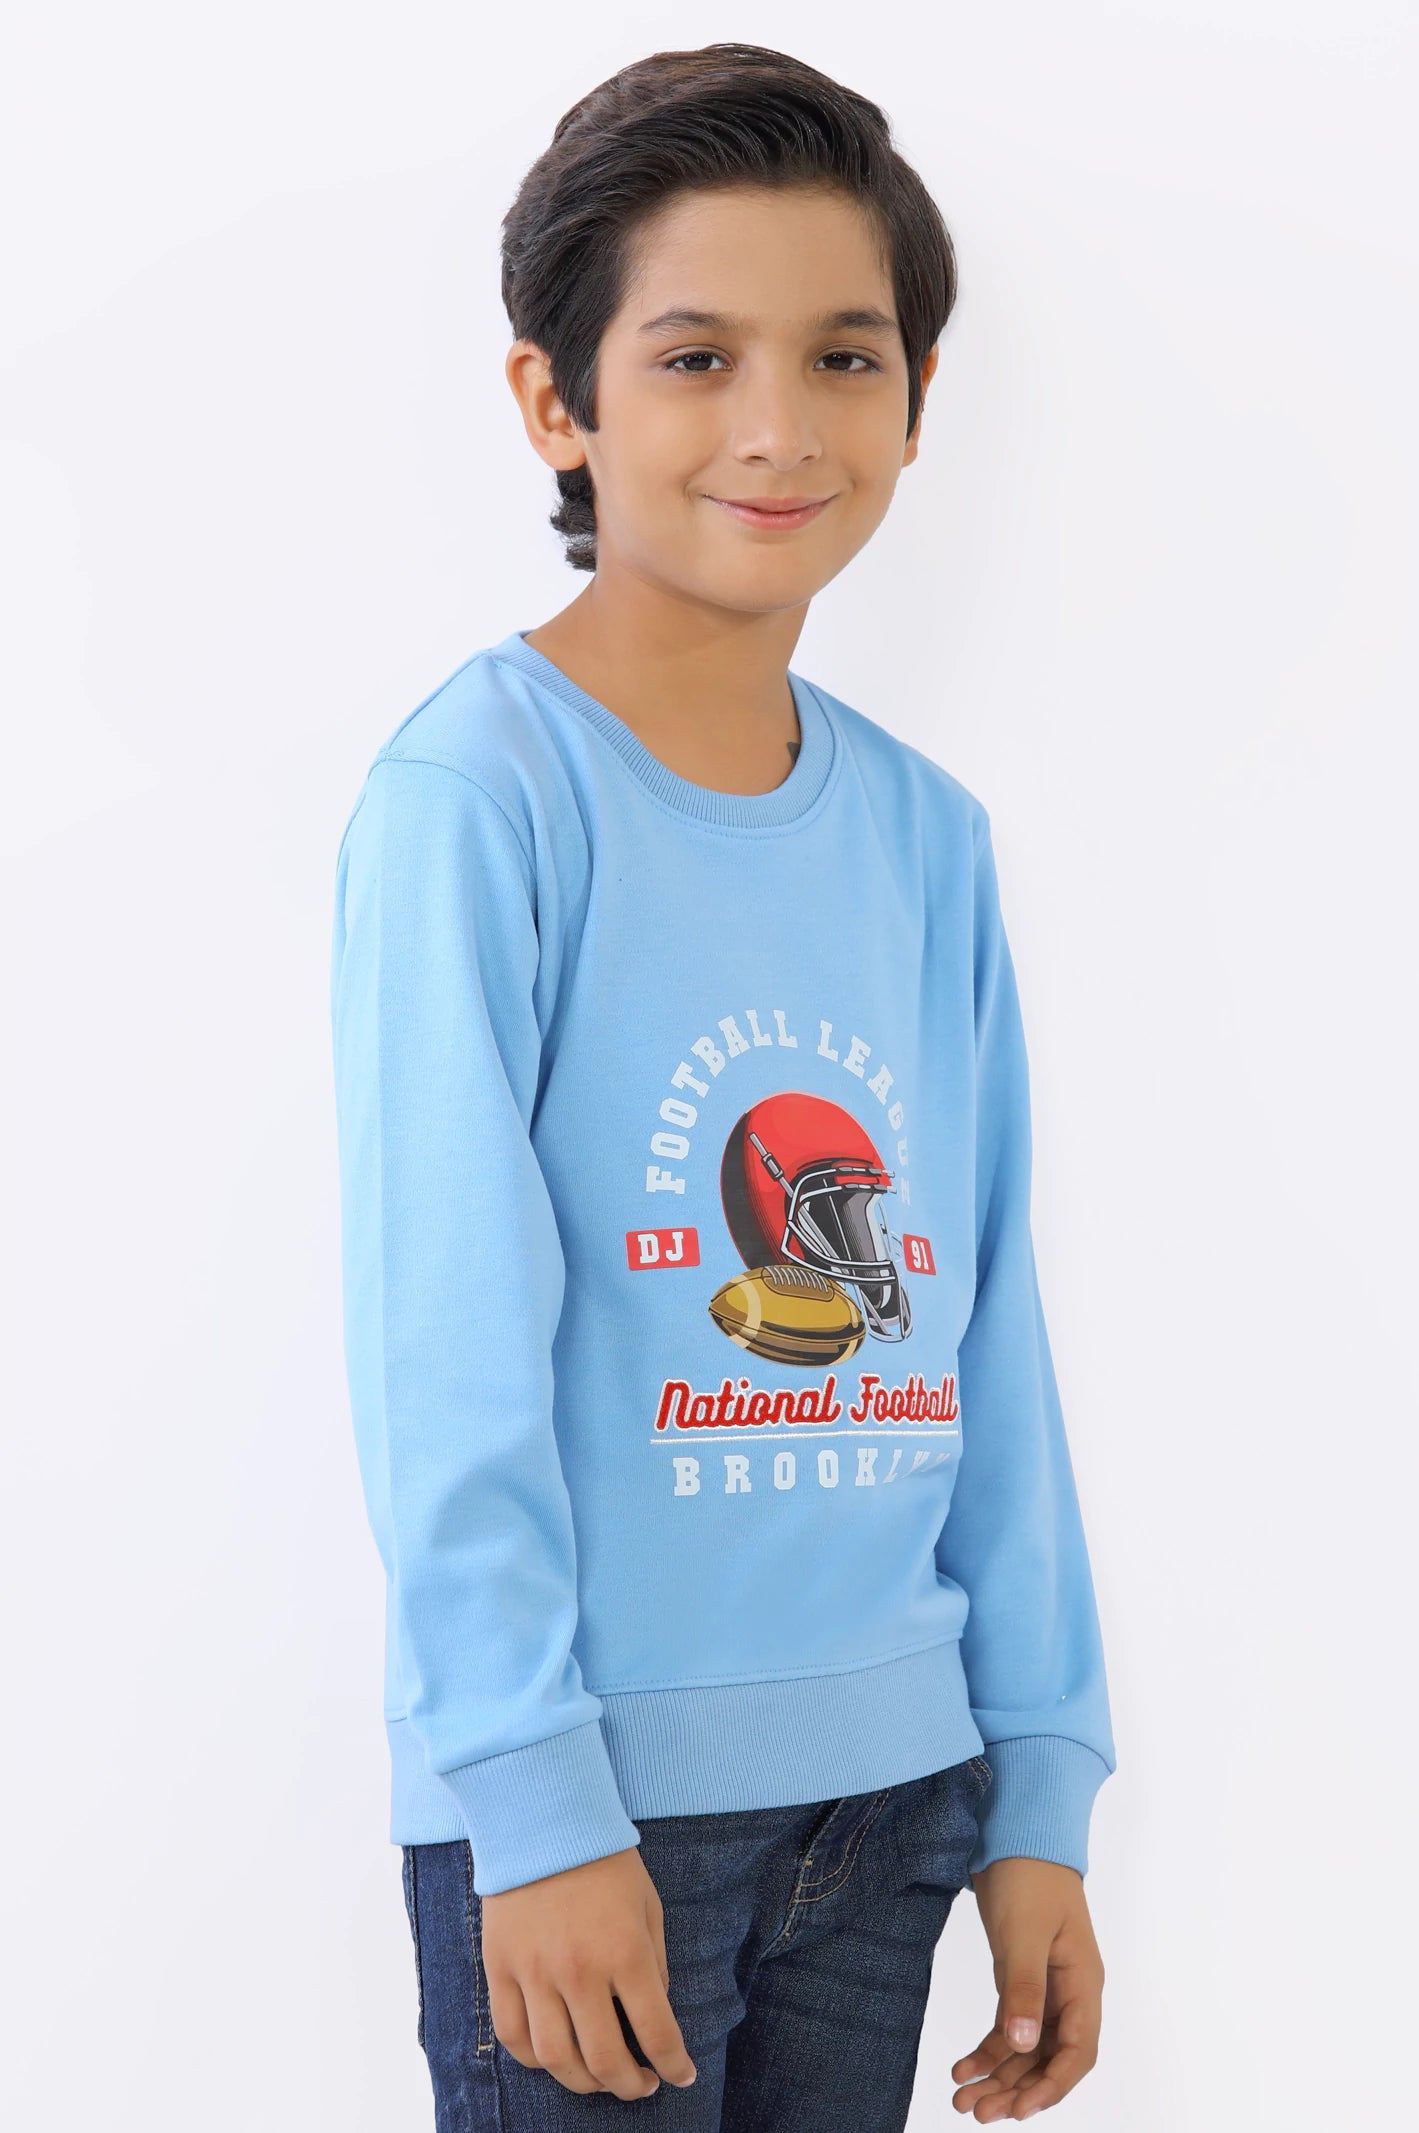 Blue Graphic Printed Boys Sweatshirt From Diners